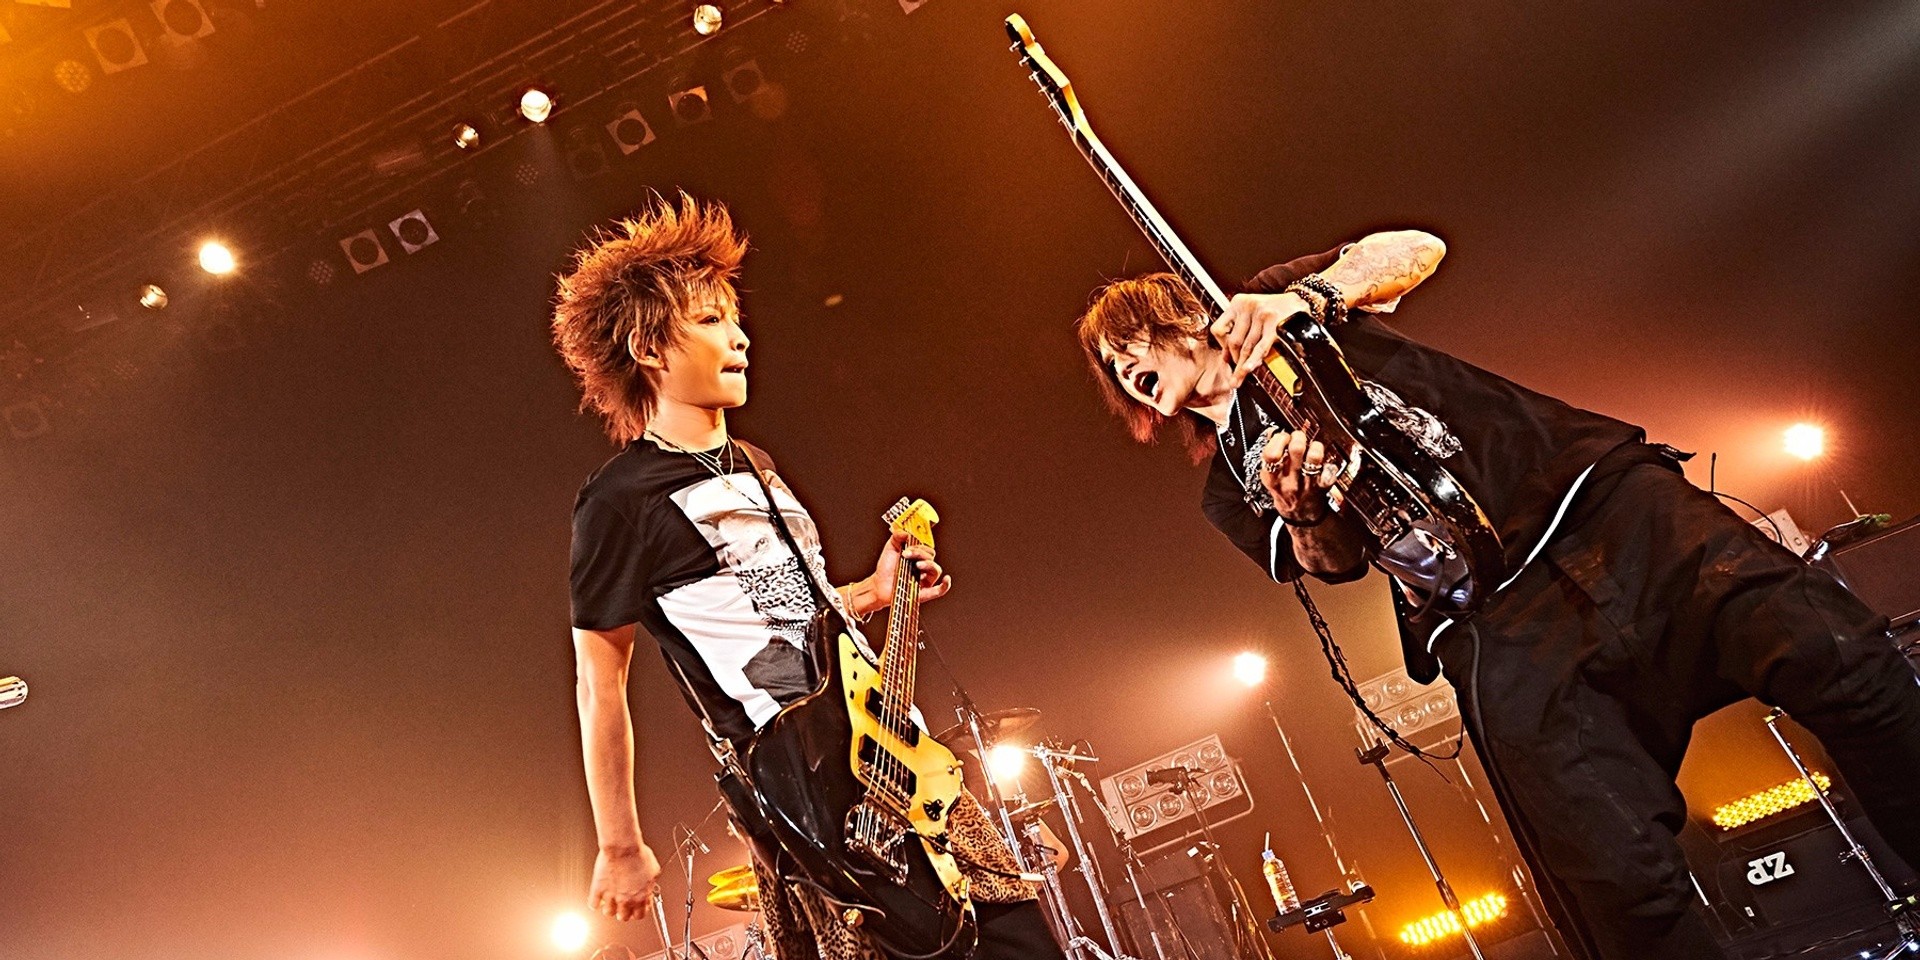 Sugizo takes on Inoran as LUNA SEA's guitar gods engage in a battle of the axes in Singapore